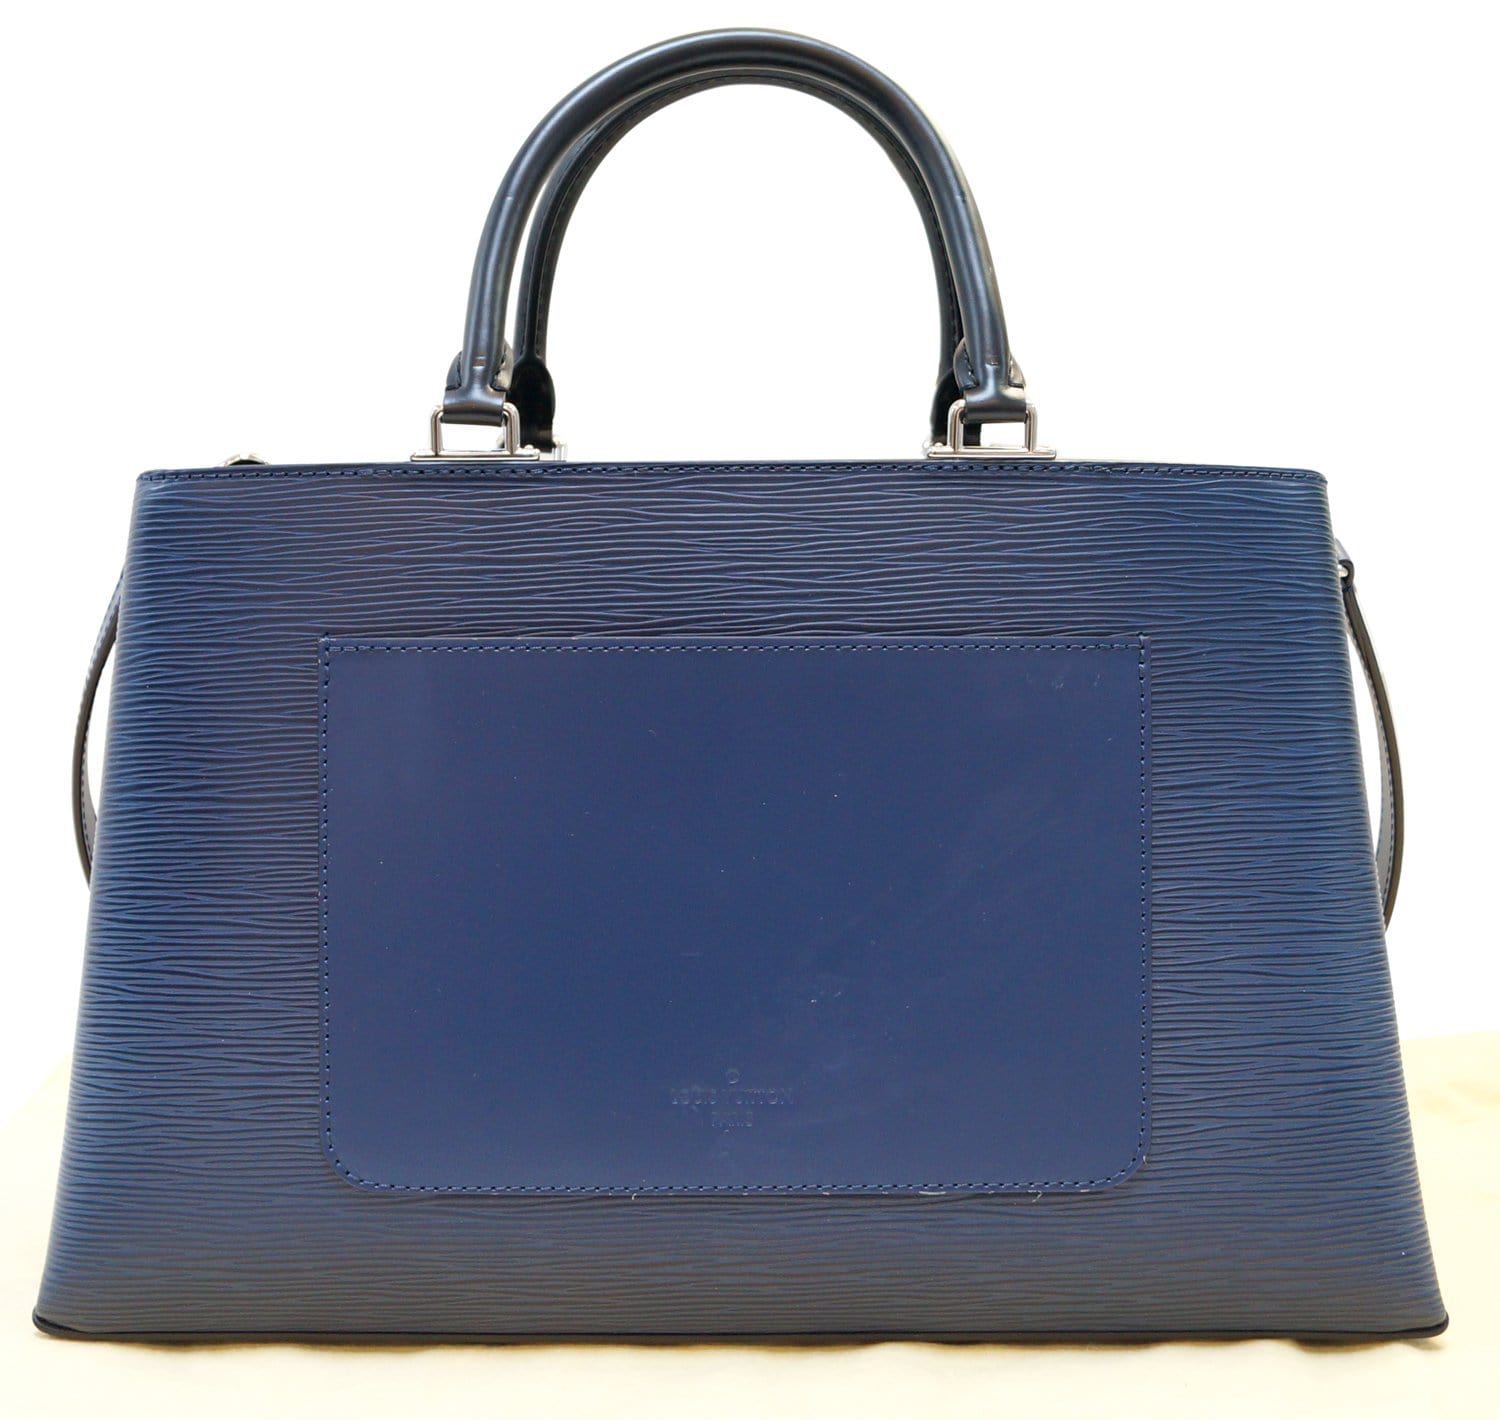 Buy Free Shipping Authentic Pre-owned Louis Vuitton Epi Blue Monceau BB  Hand Bag W/ Shoulder Strap M40976 210536 from Japan - Buy authentic Plus  exclusive items from Japan